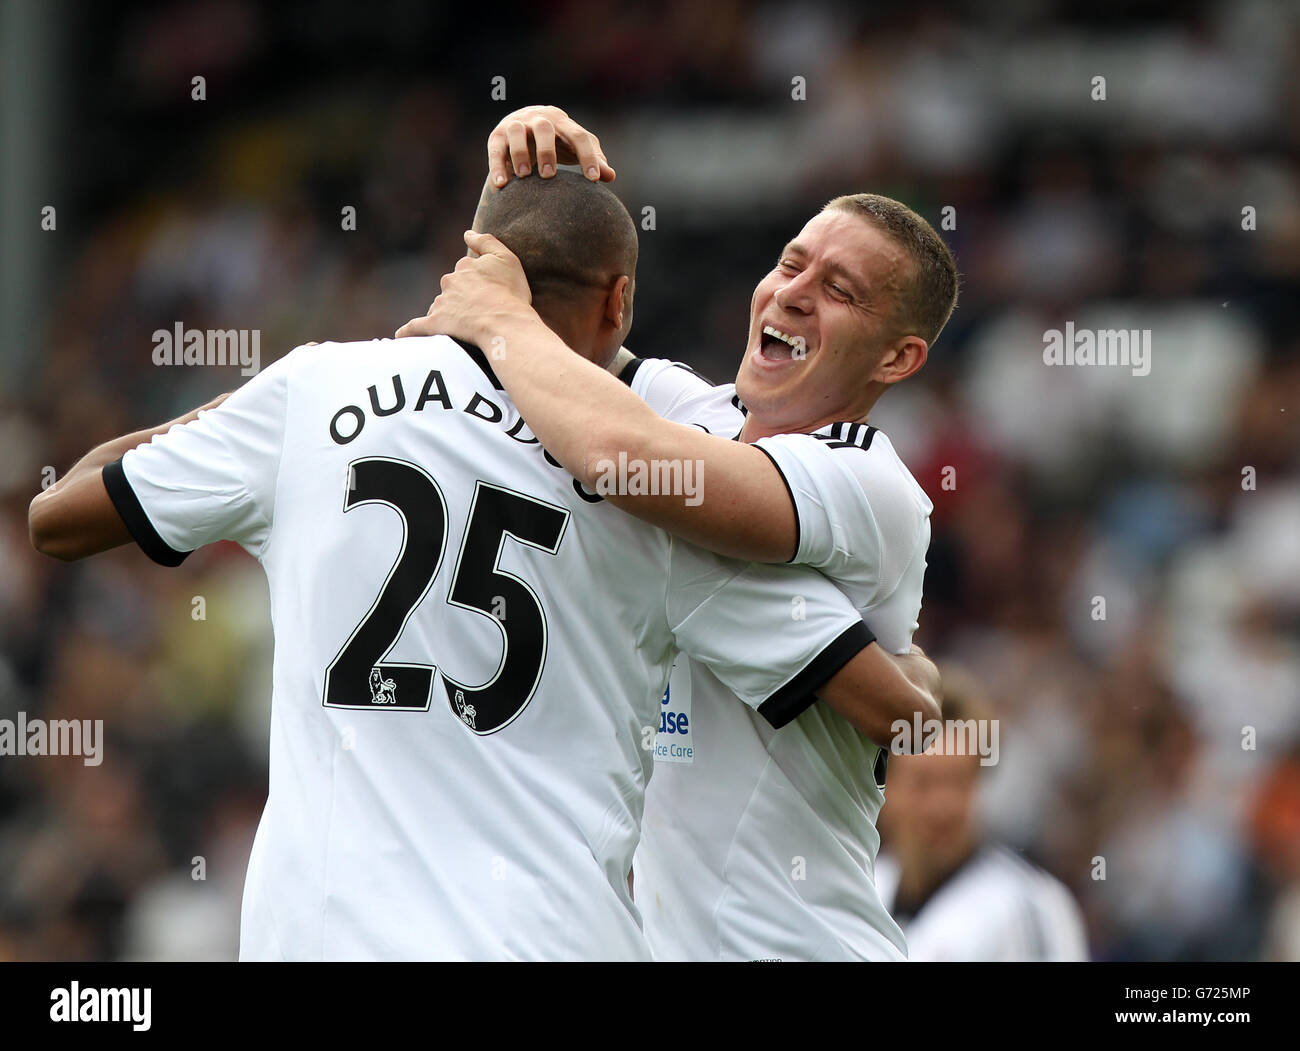 Soccer - Charity All Star Match - Fulham v Sealand - Craven Cottage Stock Photo